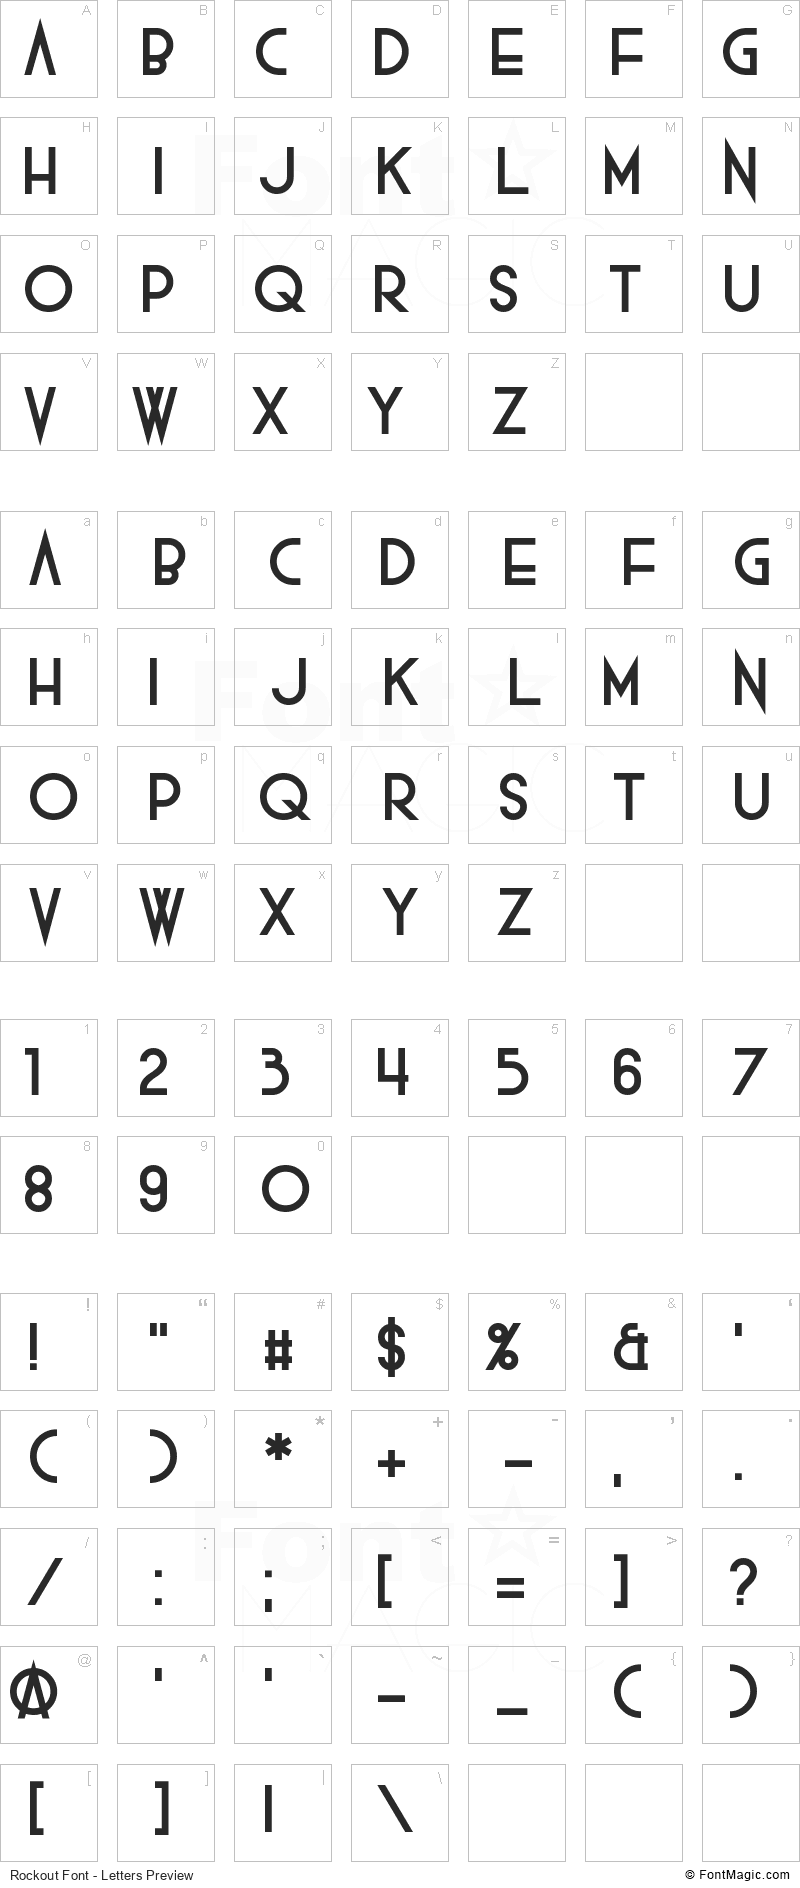 Rockout Font - All Latters Preview Chart